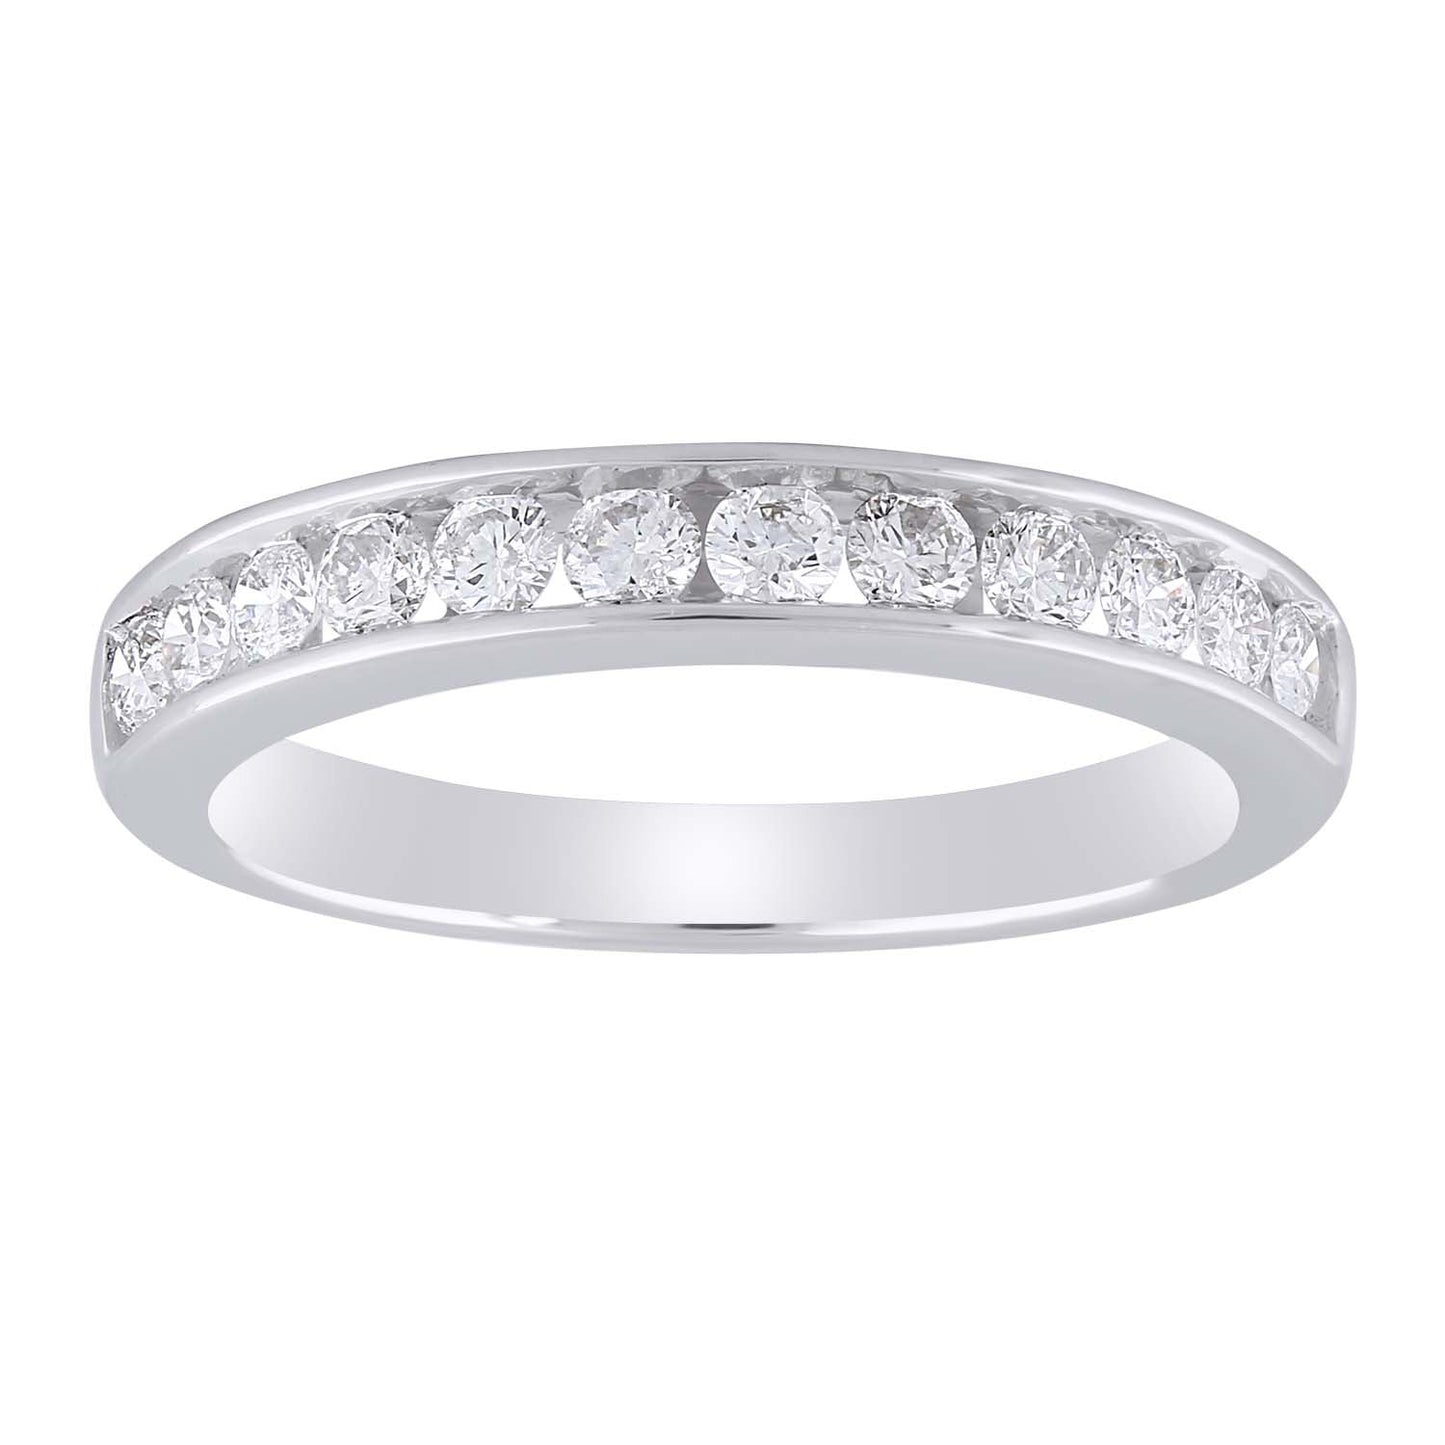 Band Ring with 0.50ct Diamond in 9K White Gold